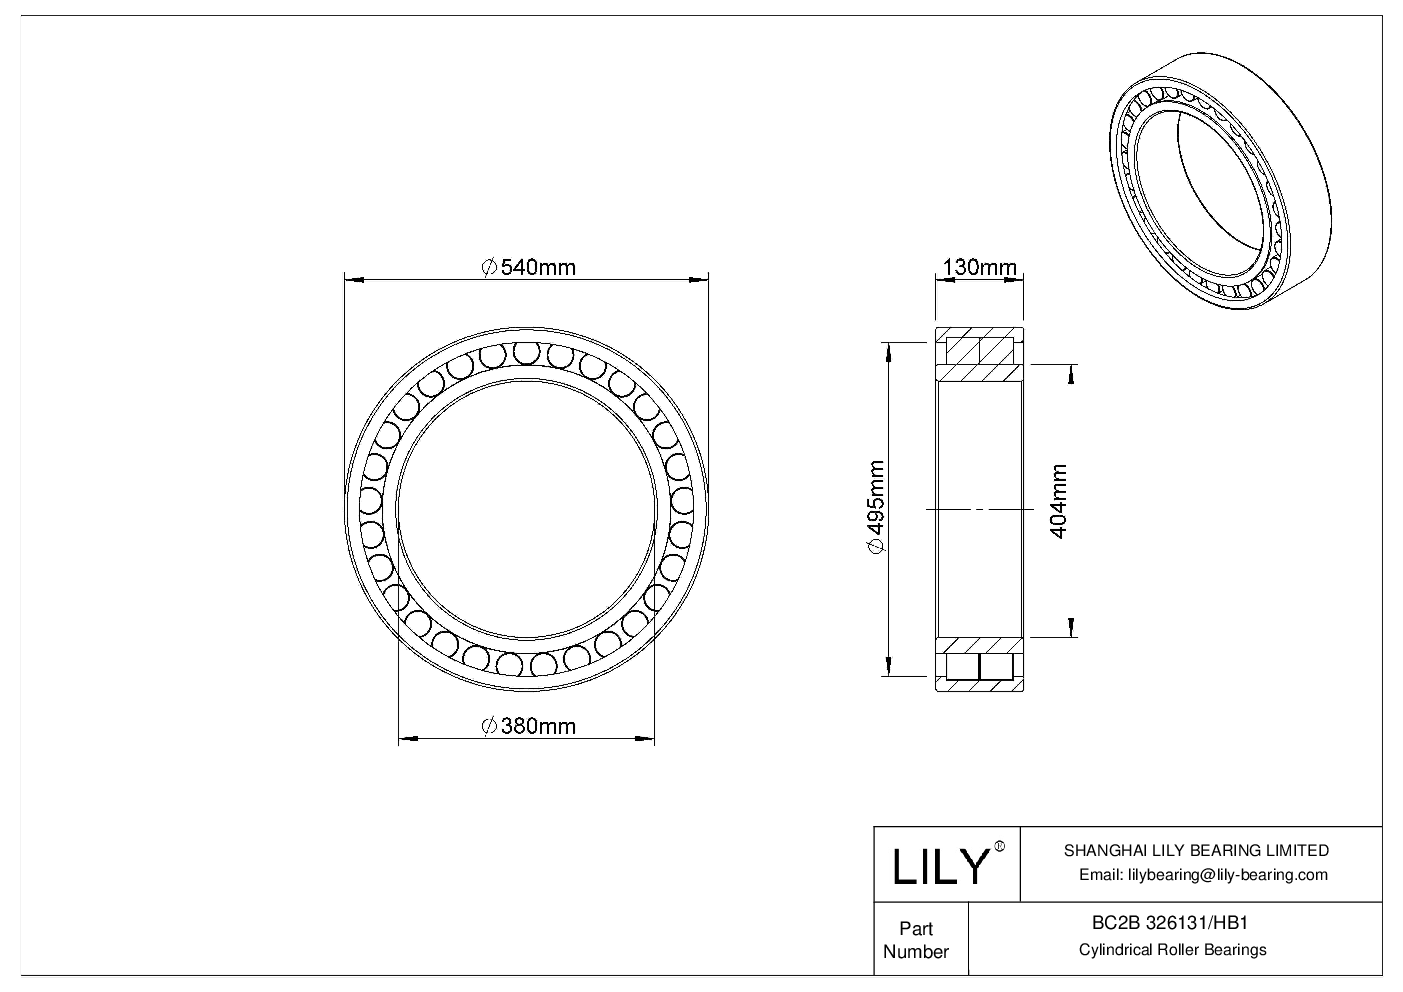 BC2B 326131/HB1 Double Row Cylindrical Roller Bearings cad drawing